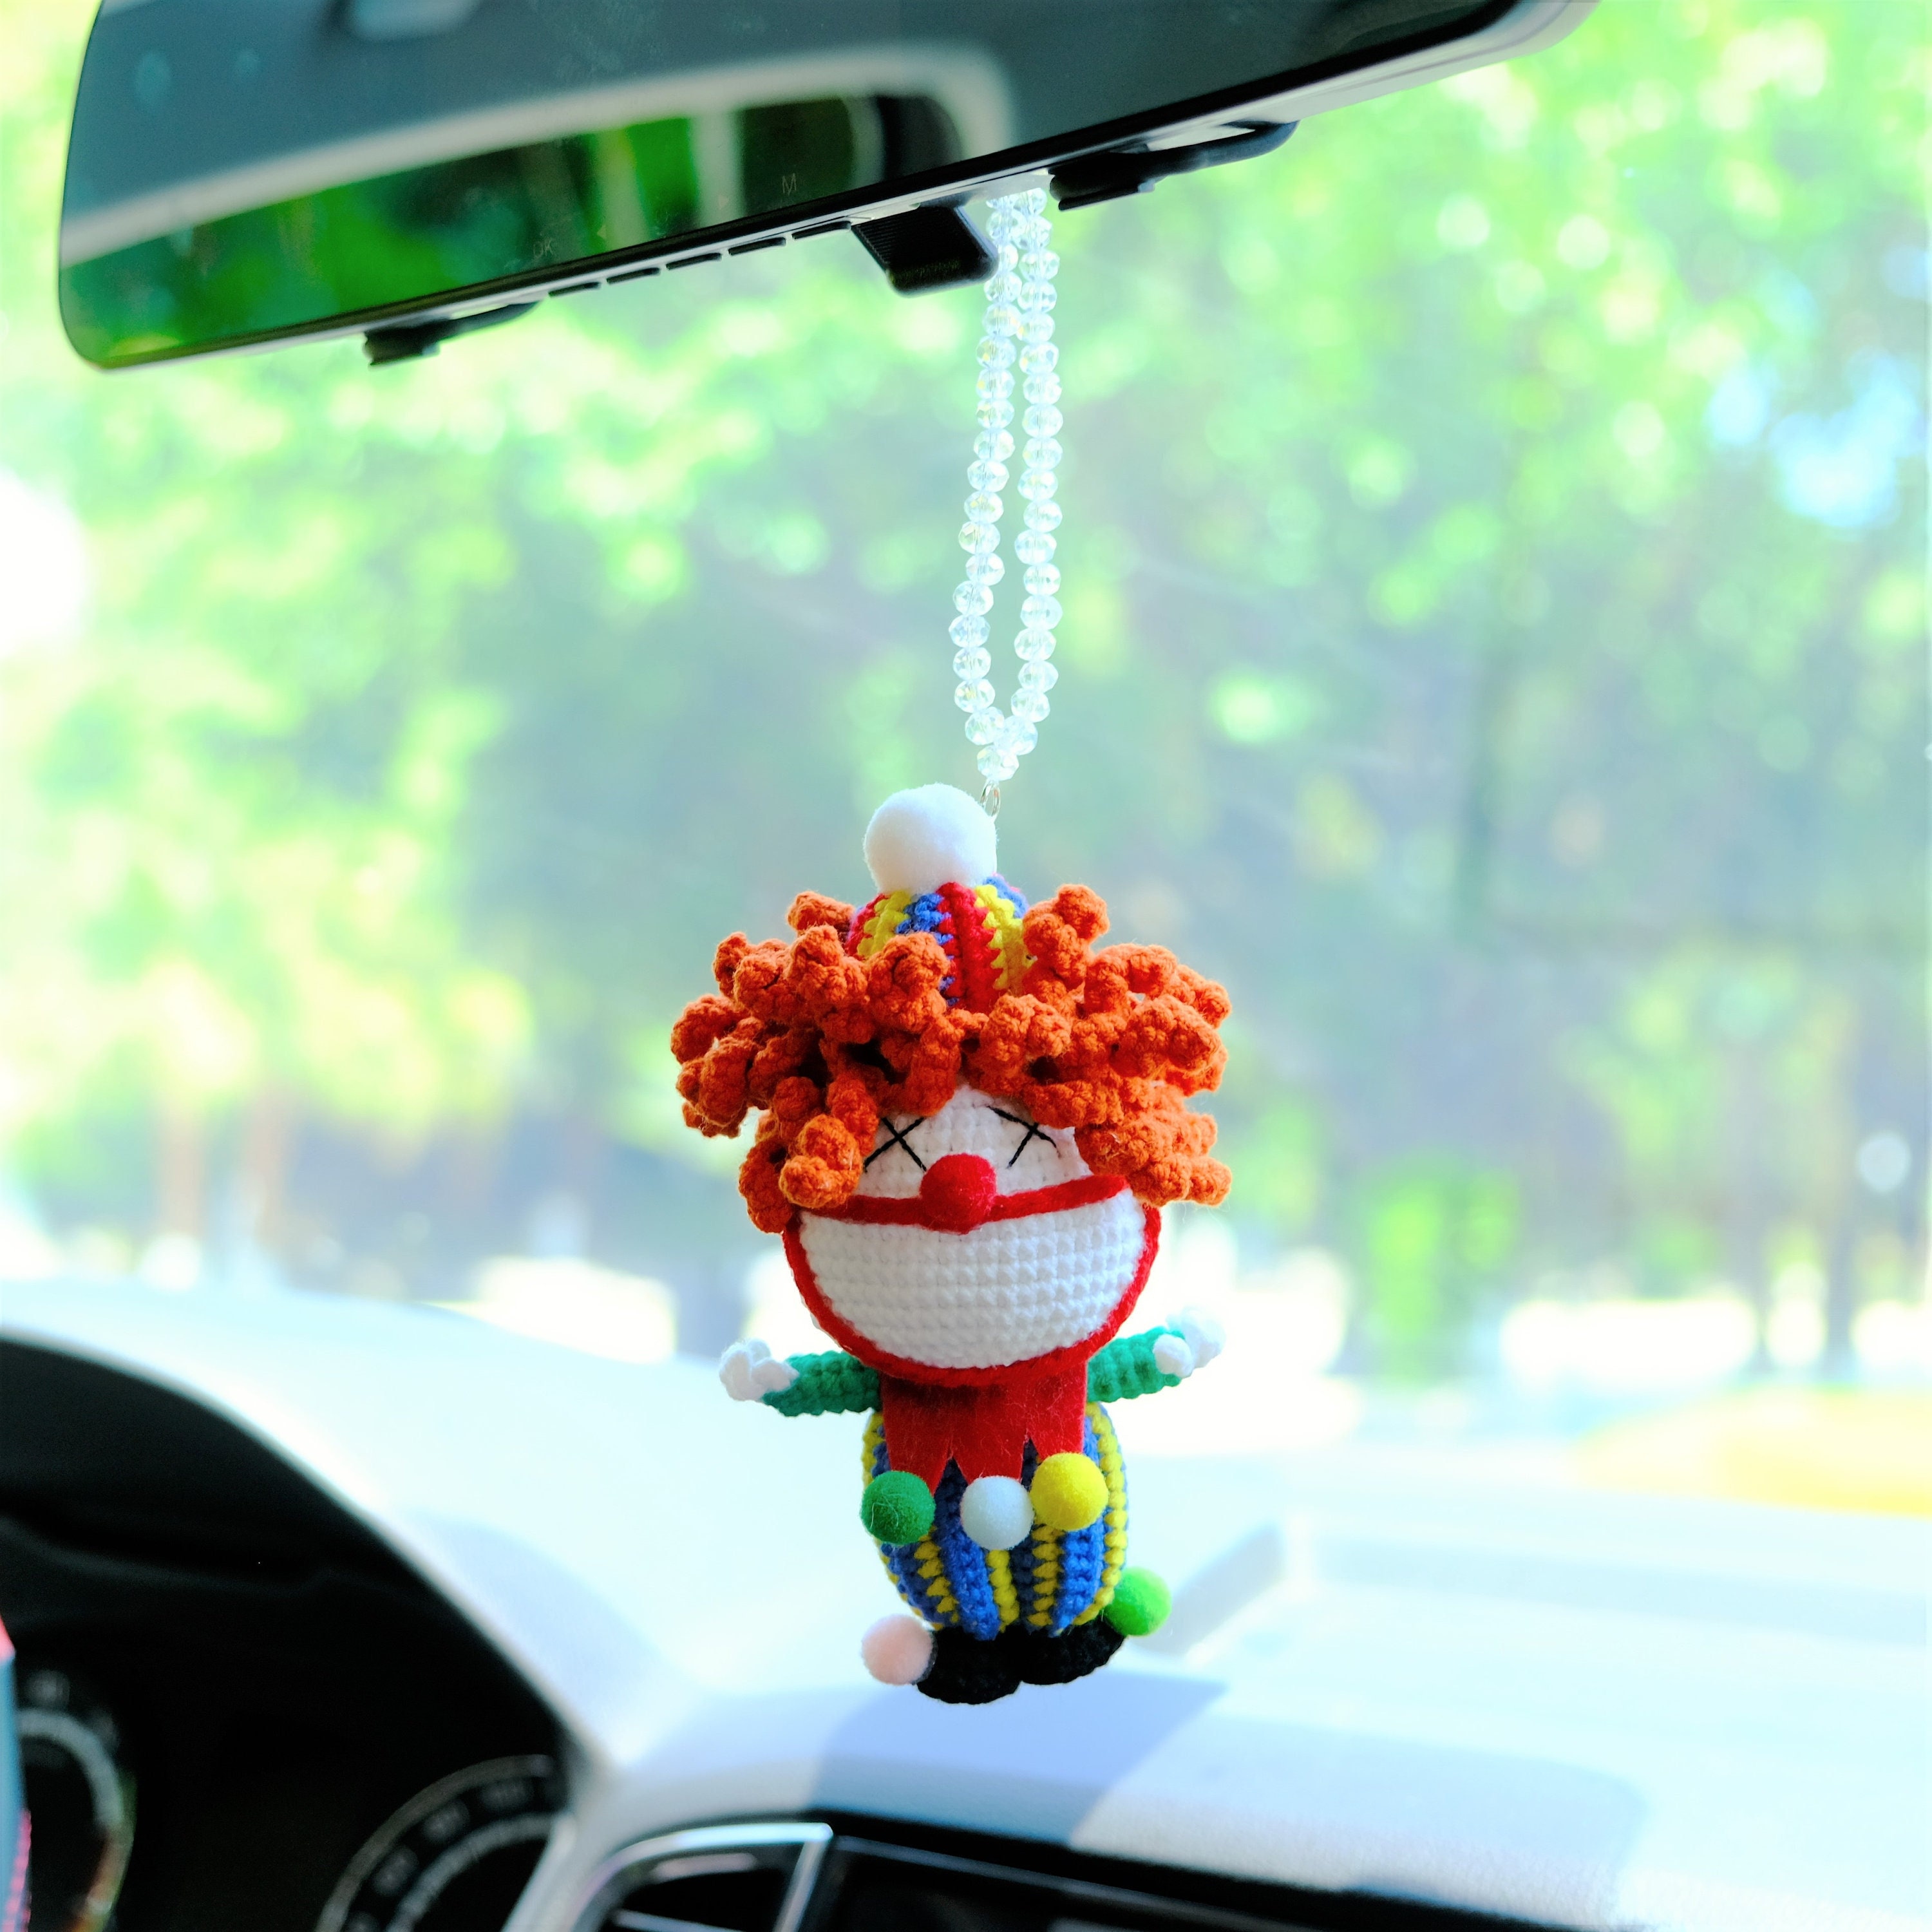 Hanging clown fish for rear view mirror Crochet car accessories